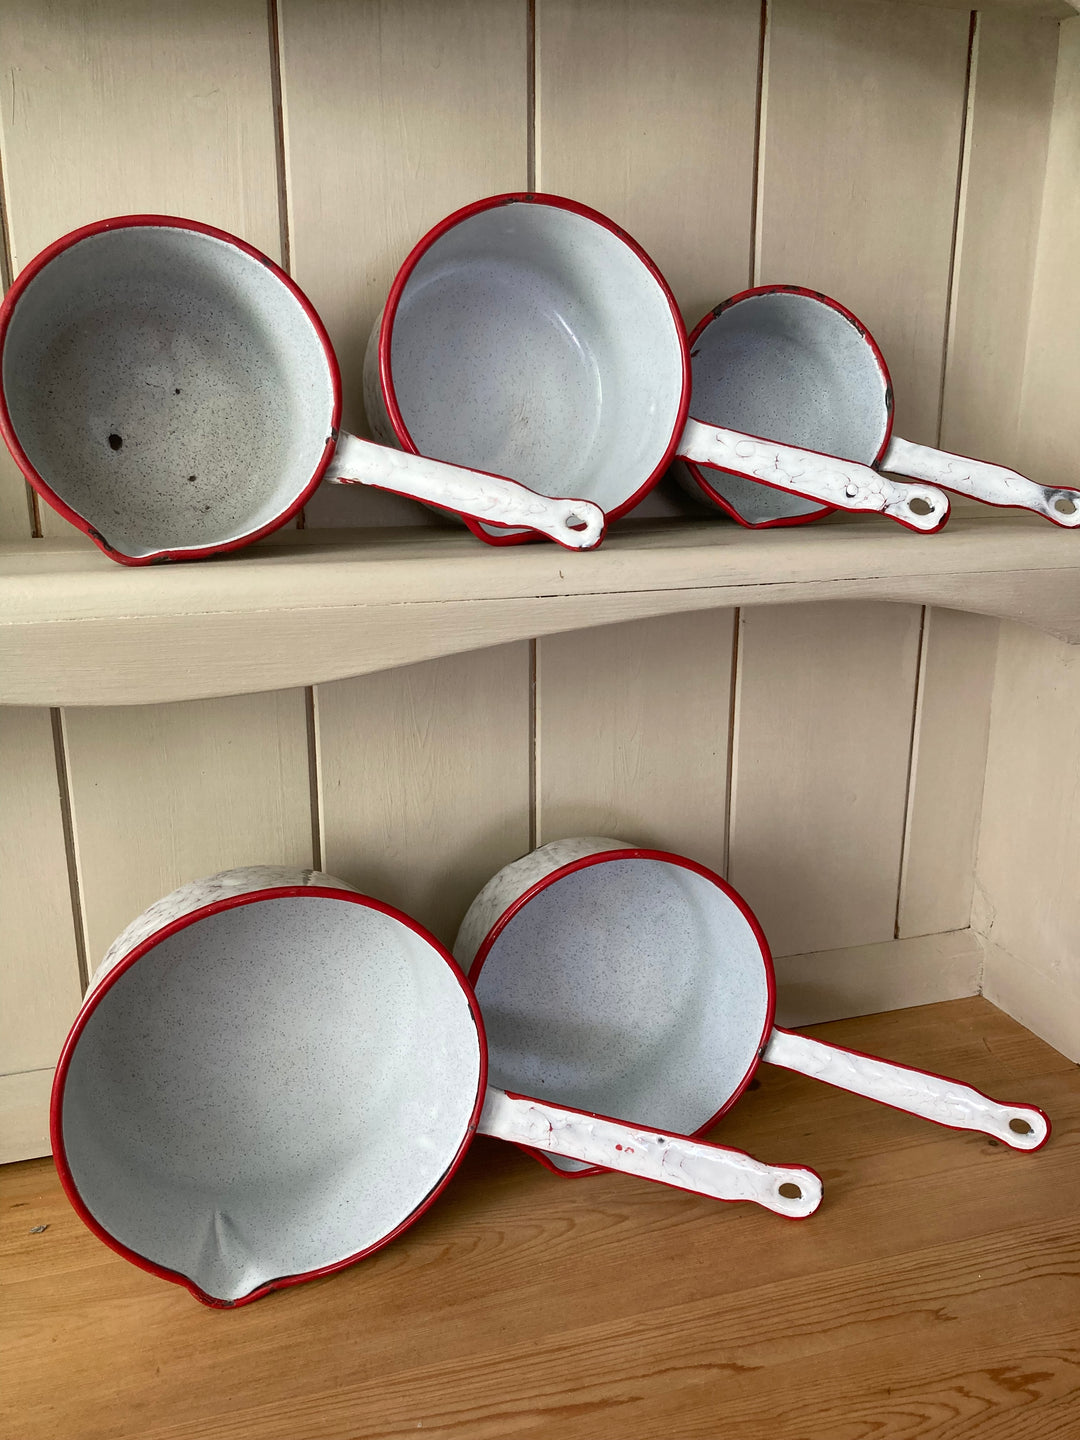 Vintage French Set of Red and White Marbled Enamel Saucepans